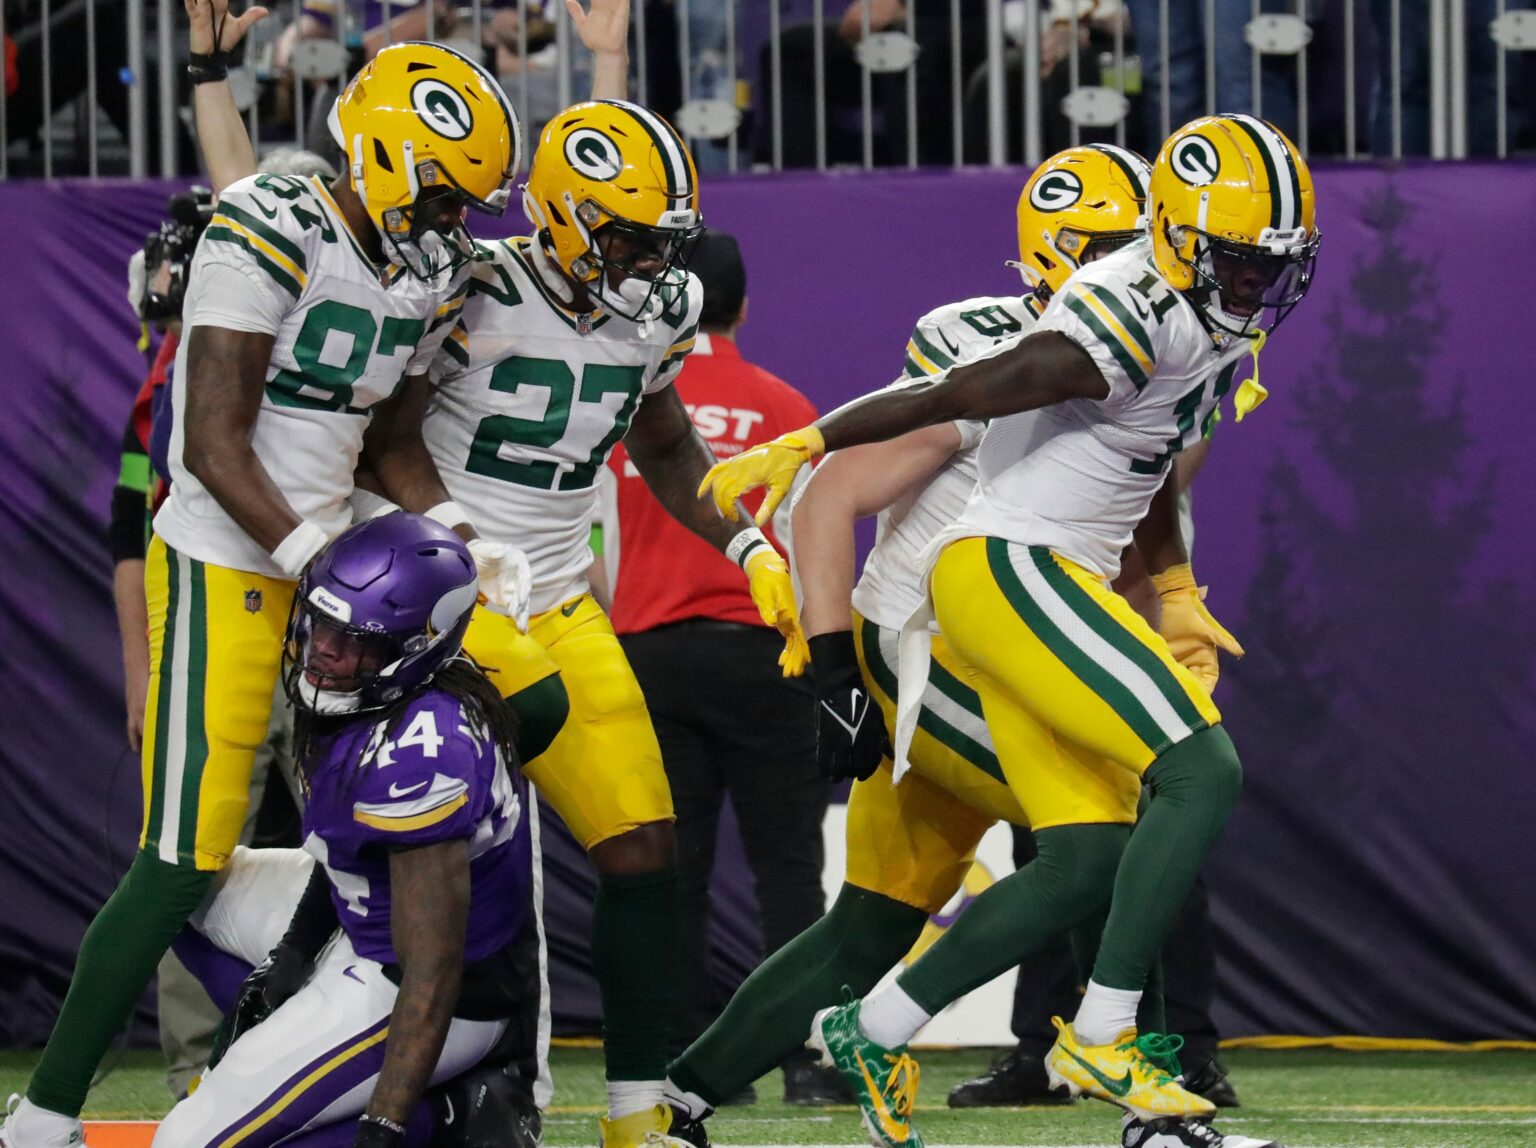 Green Bay Packers The NFL's Youngest Offense Made A Complete 180 In